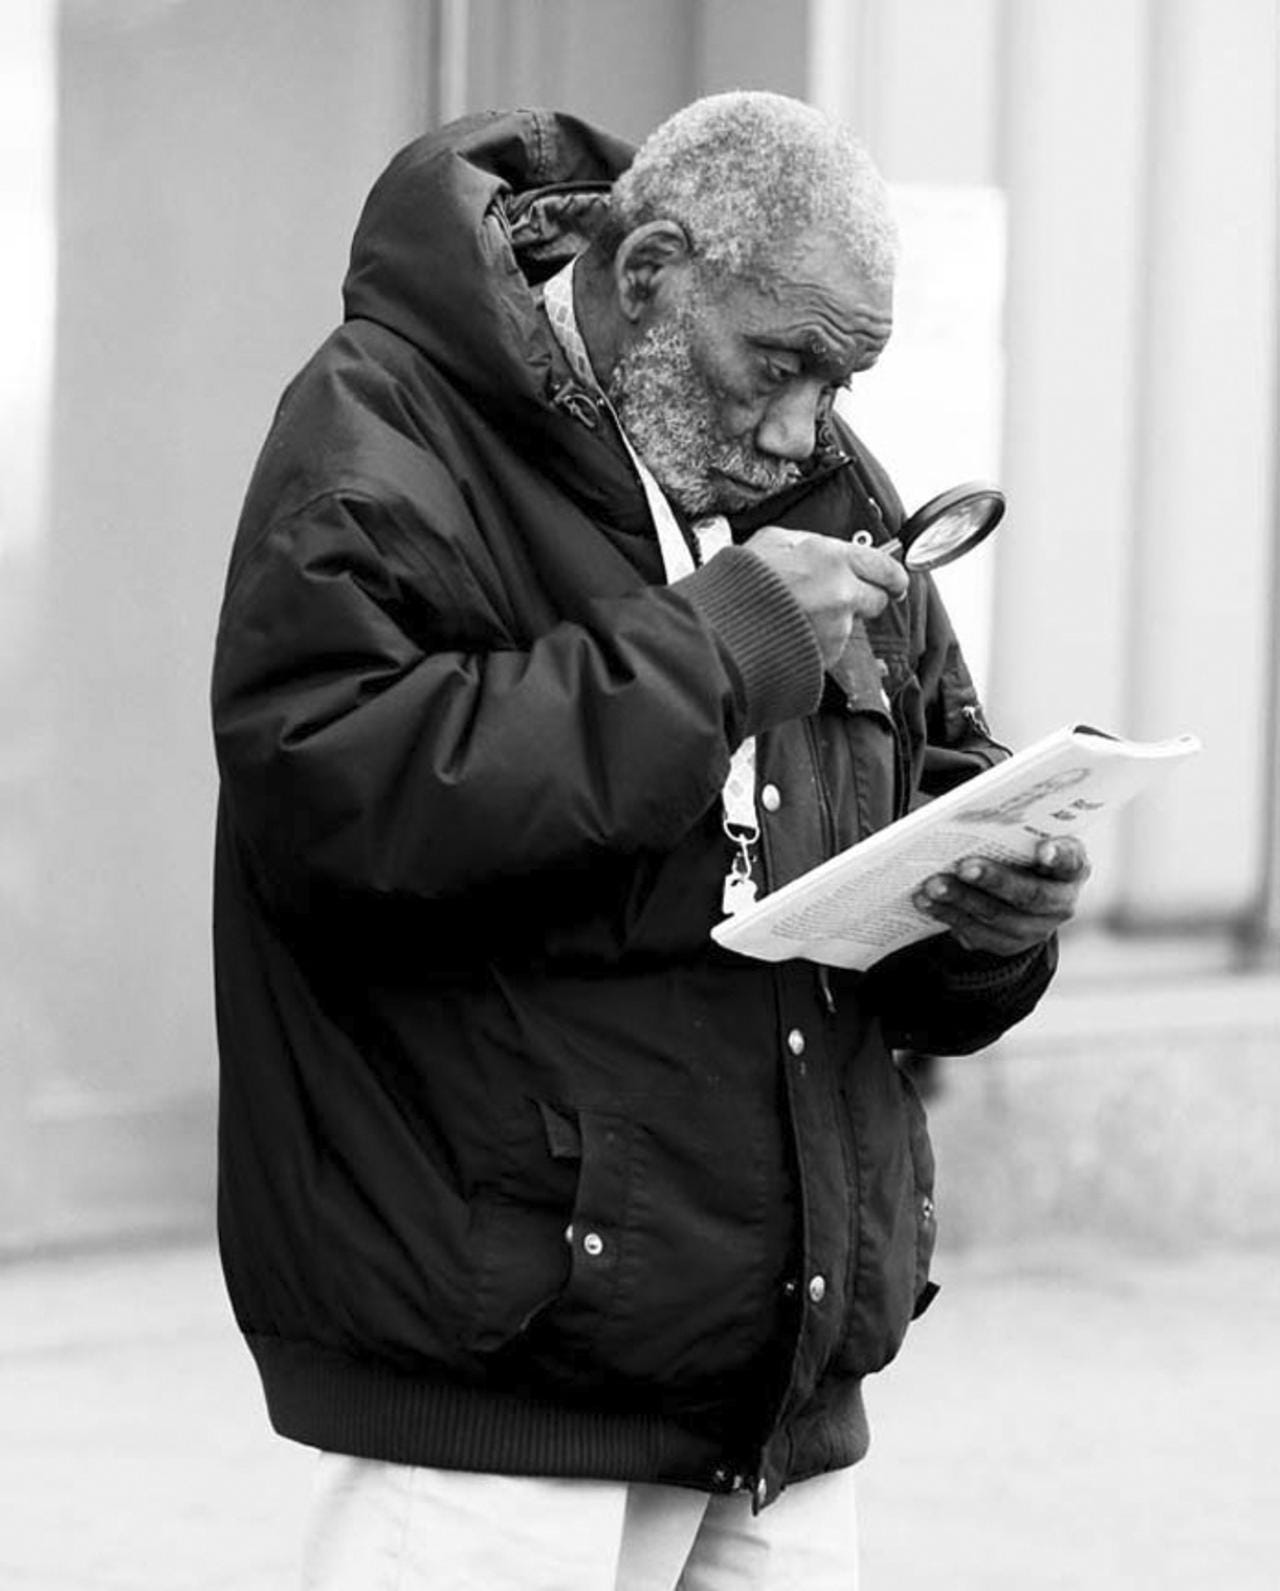 A man reads about the preacher Richard Allen with the help of a magnifying glass.